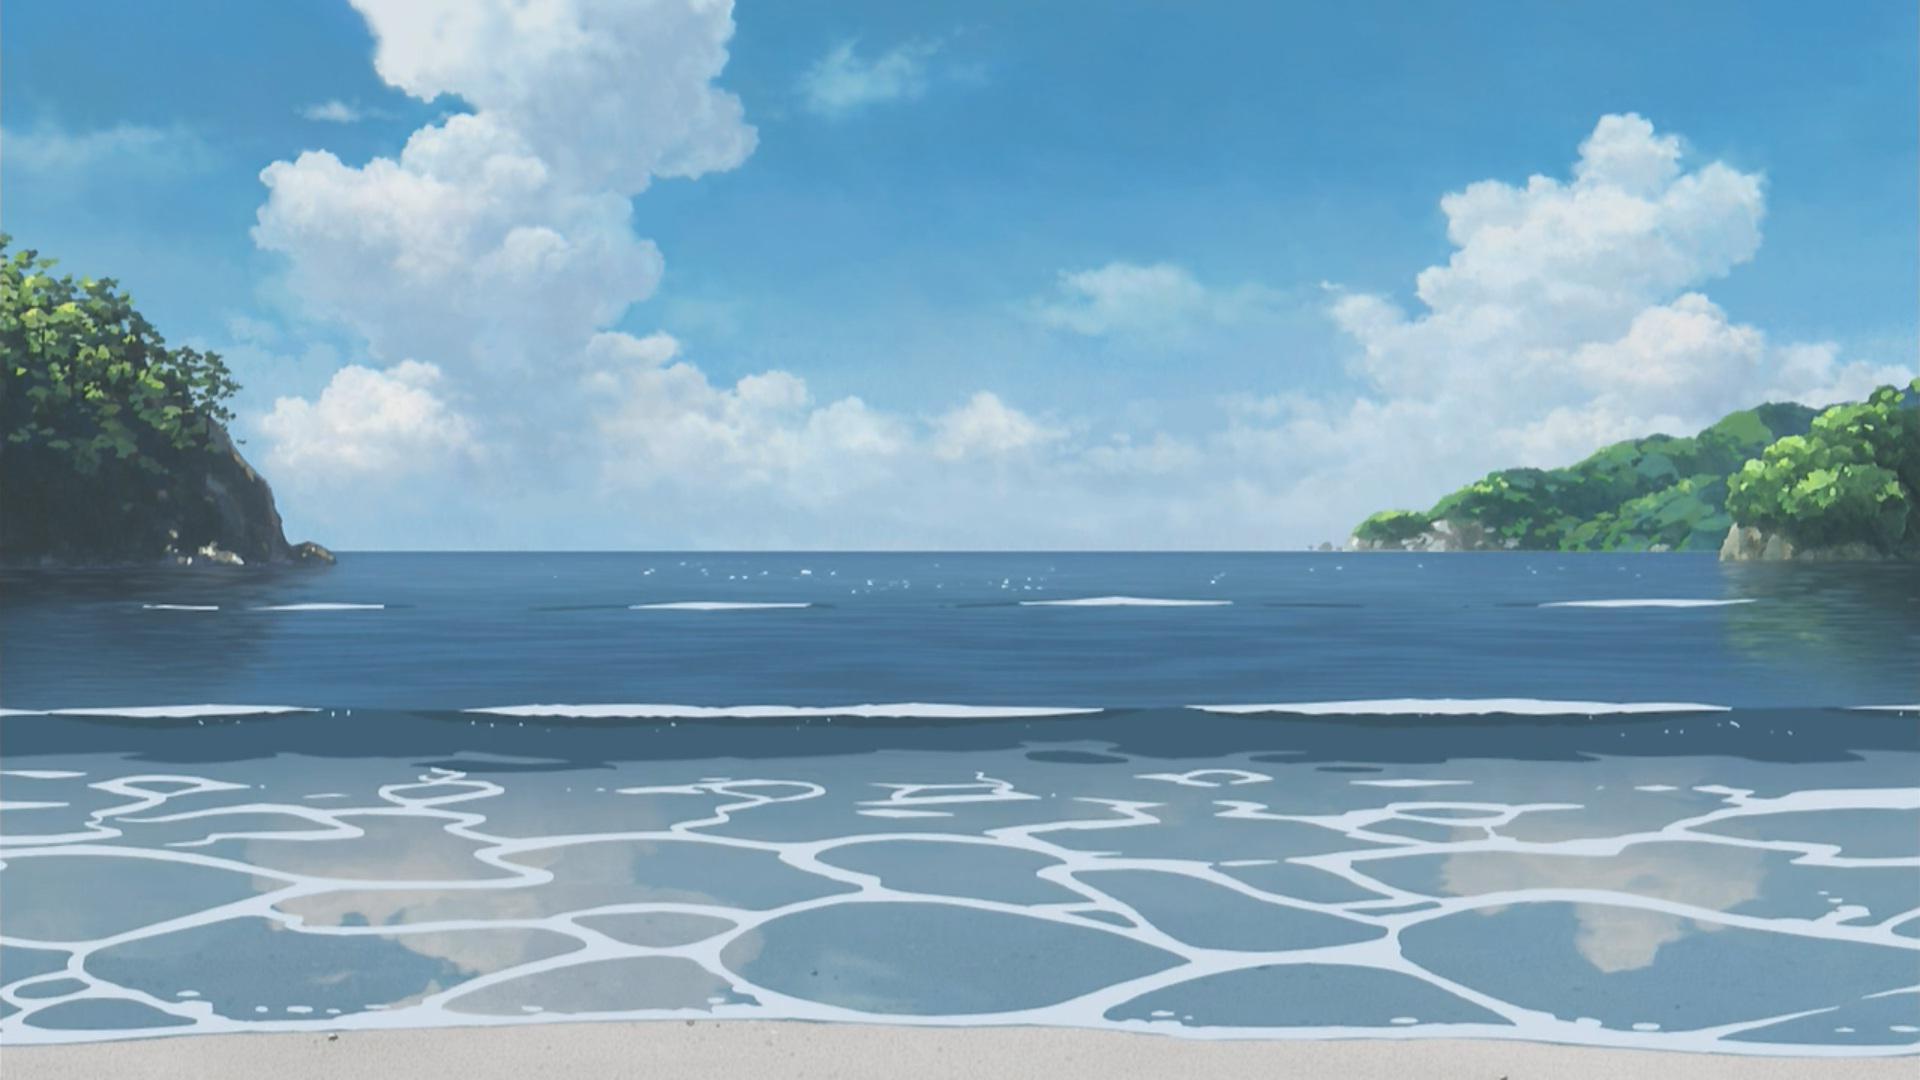 EntePic Anime Beach Wallpaper Group With 64 Items anime scenery